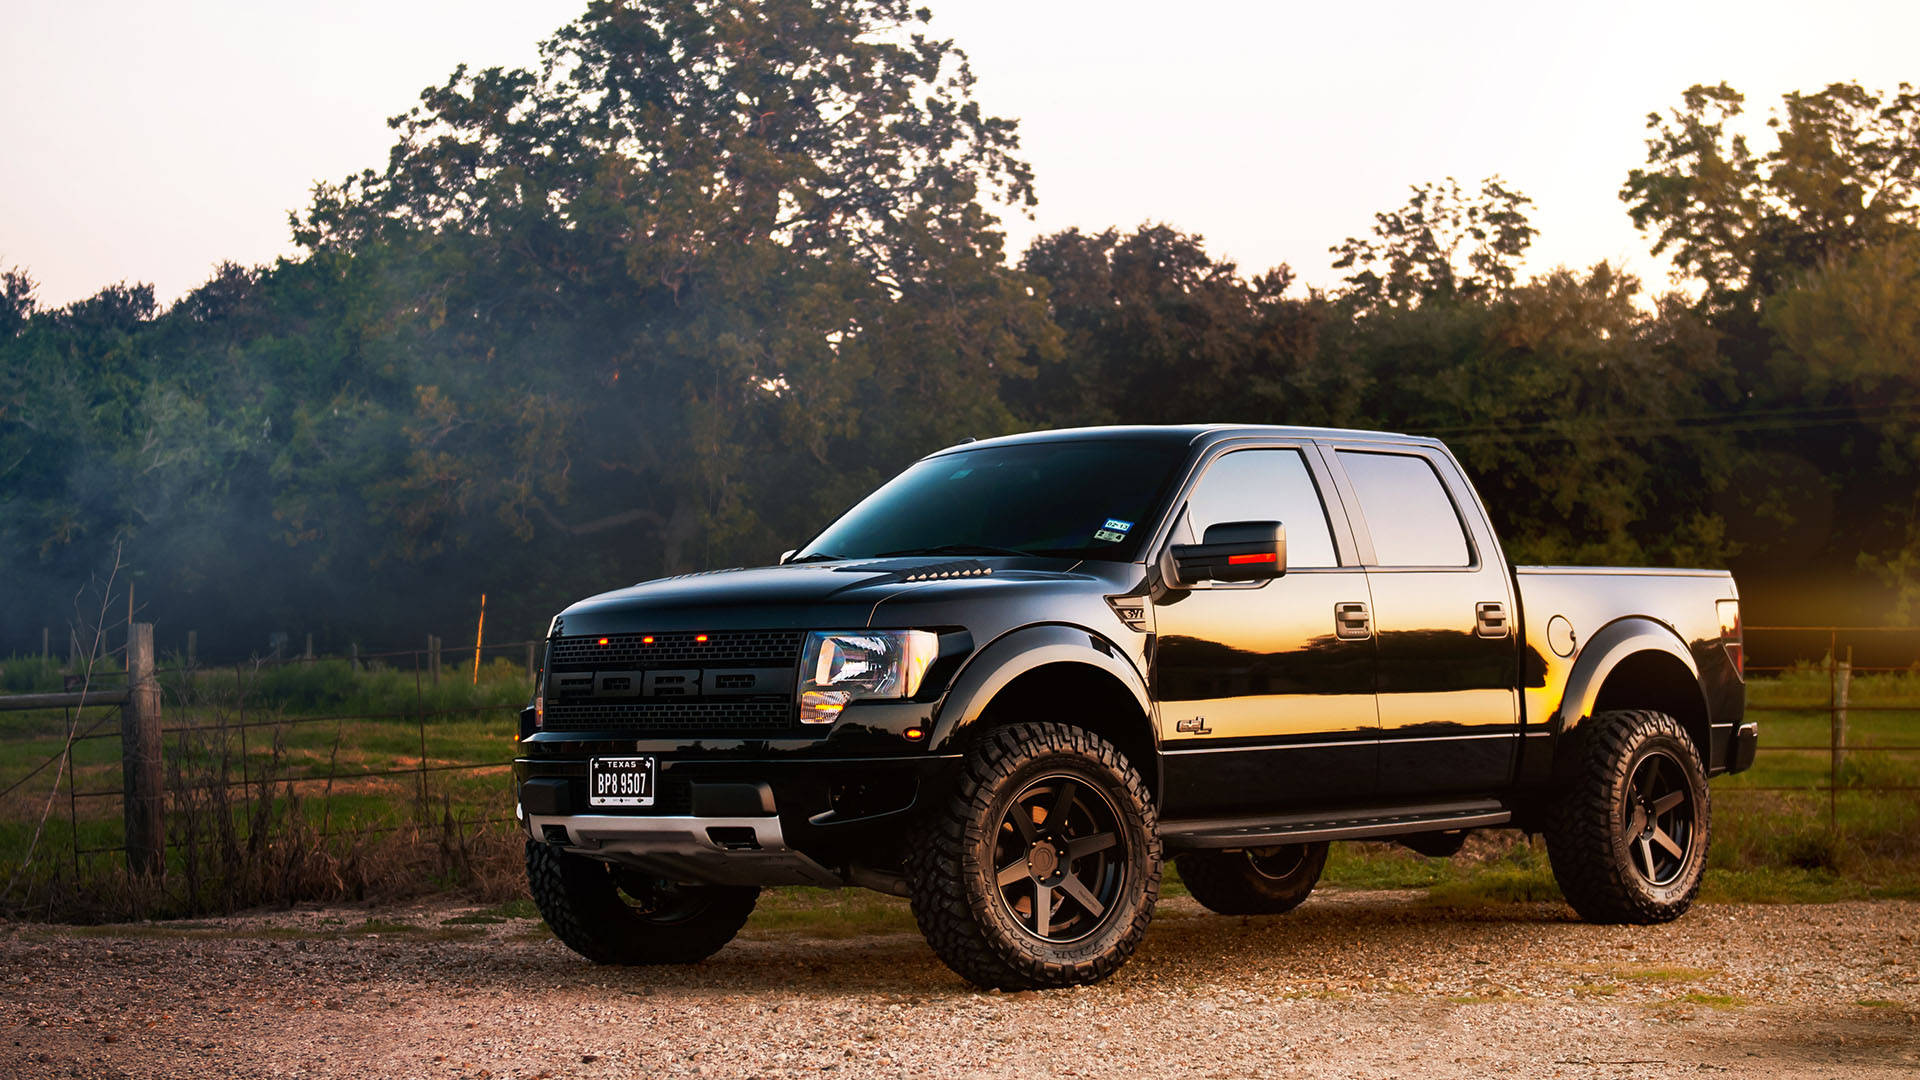 Ford Raptor In Shiny Black Paint Wallpaper